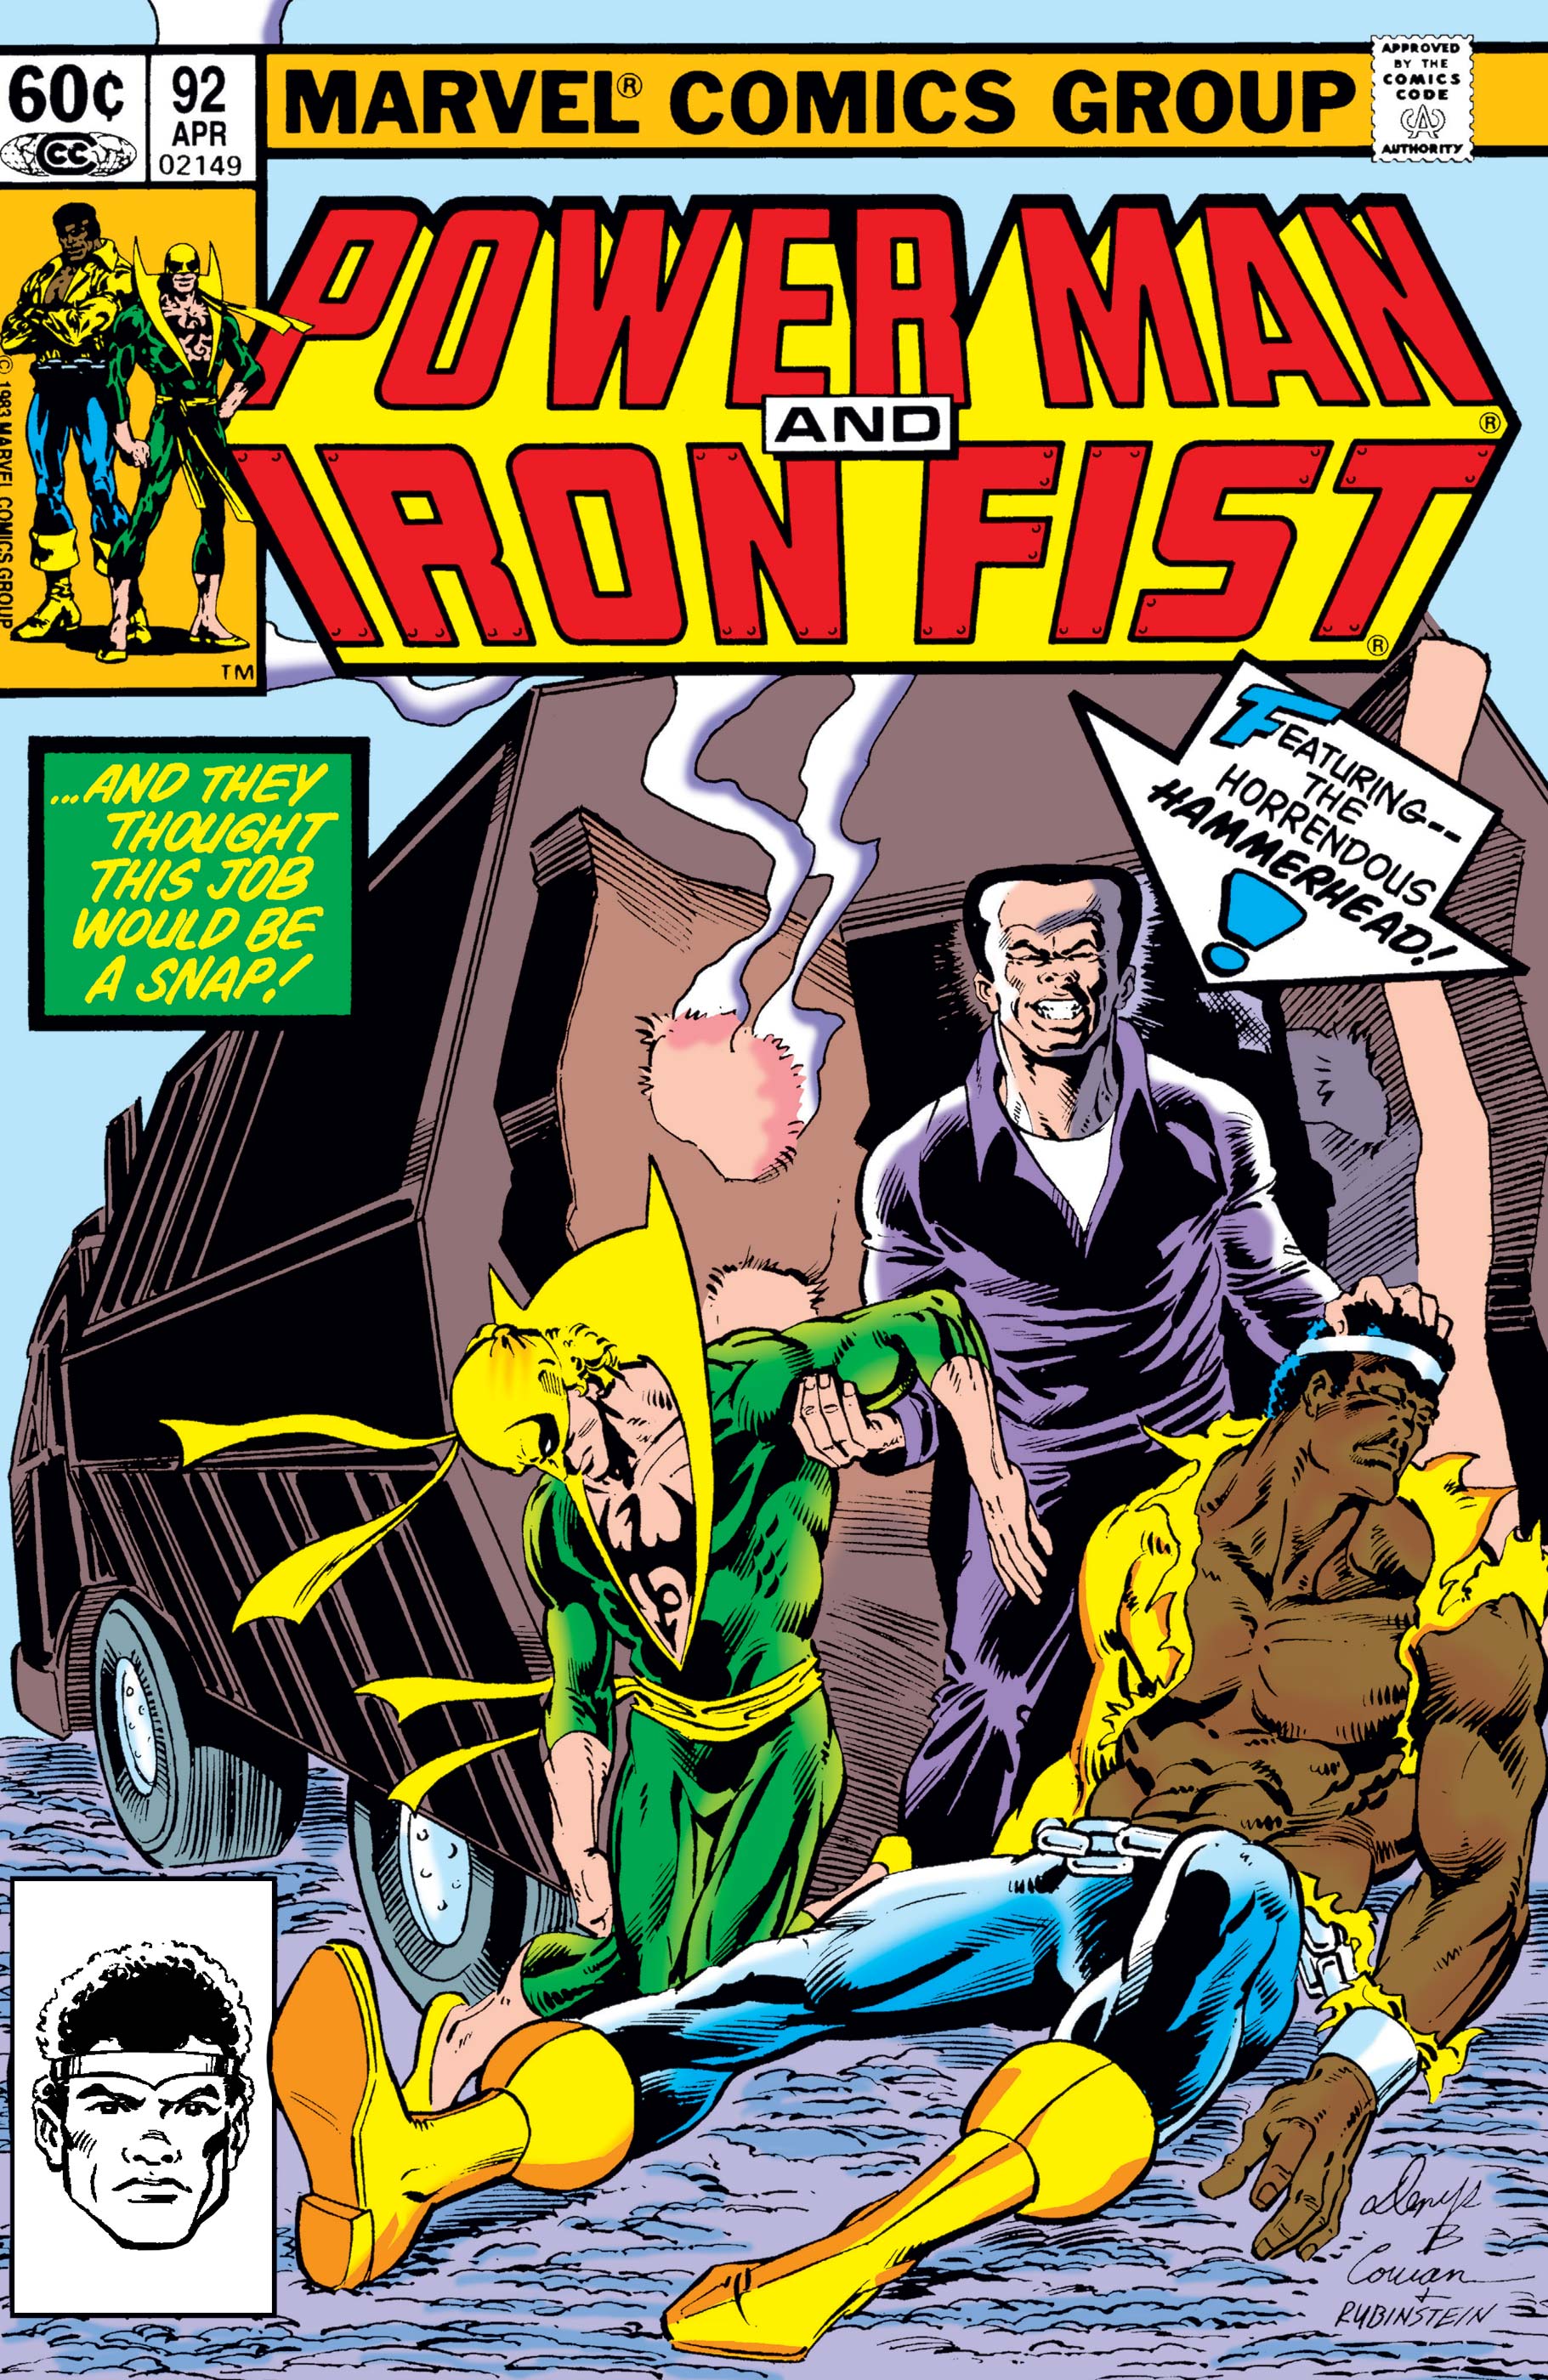 Power Man and Iron Fist (1978) #92